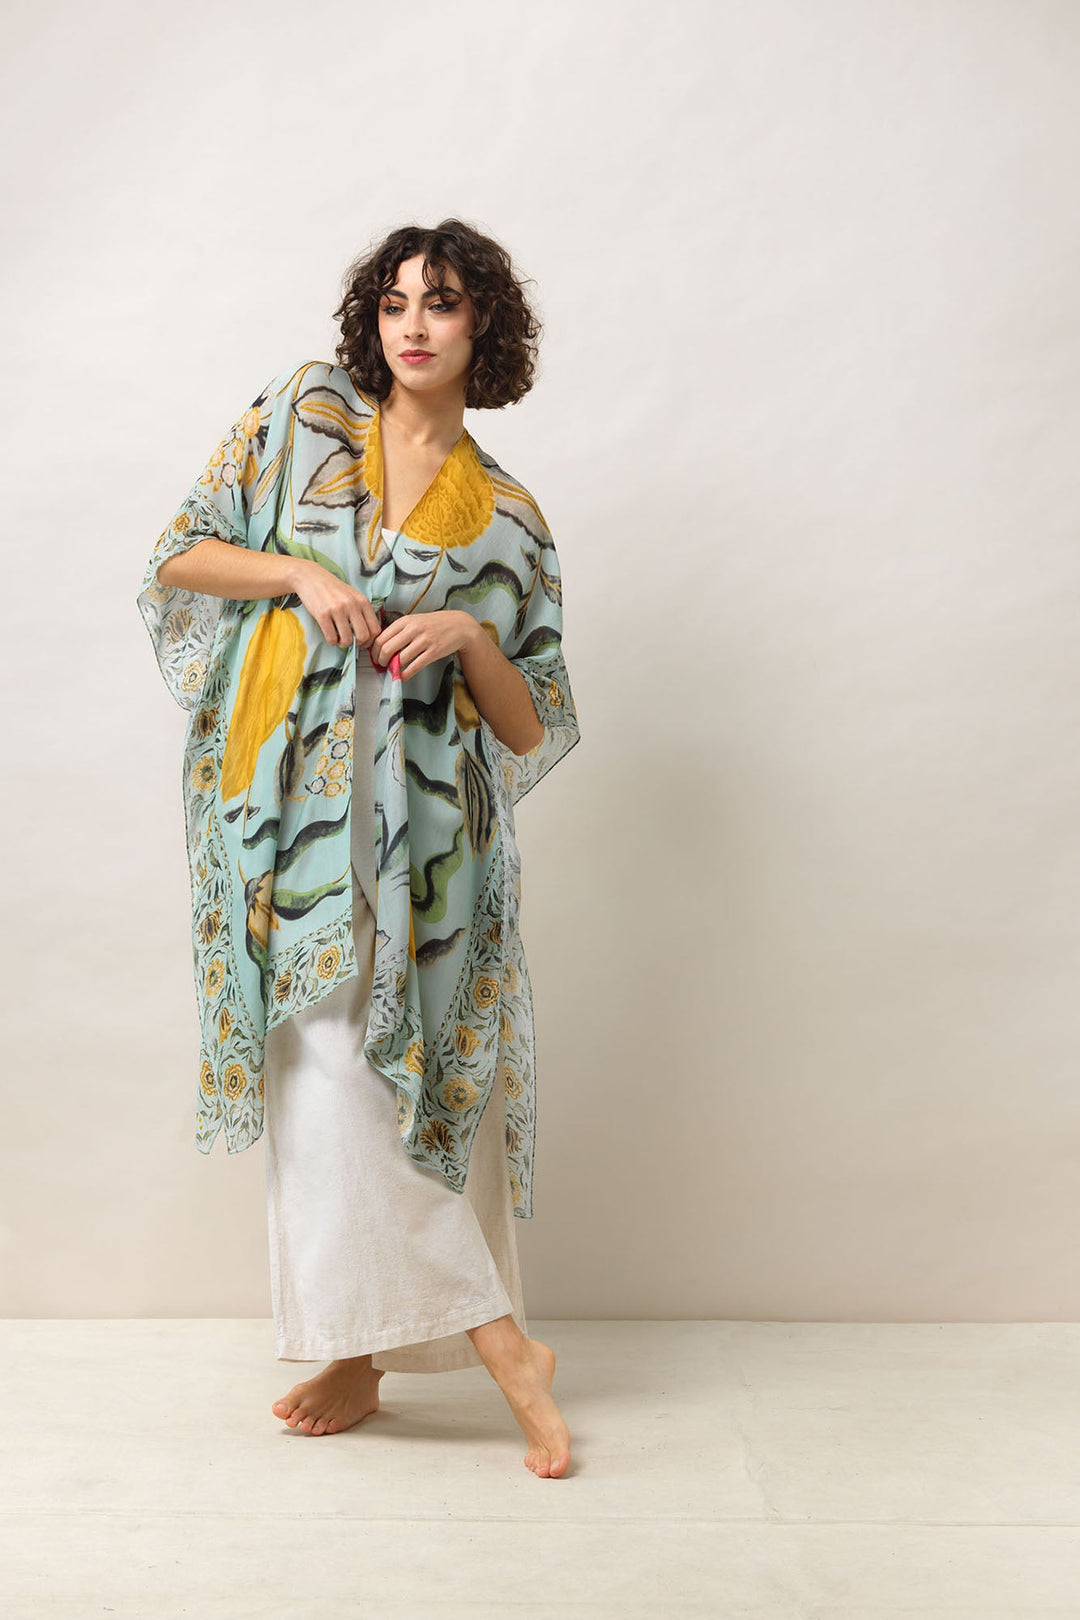 Women's lightweight throwover shawl in aqua with floral joy print by One Hundred Stars